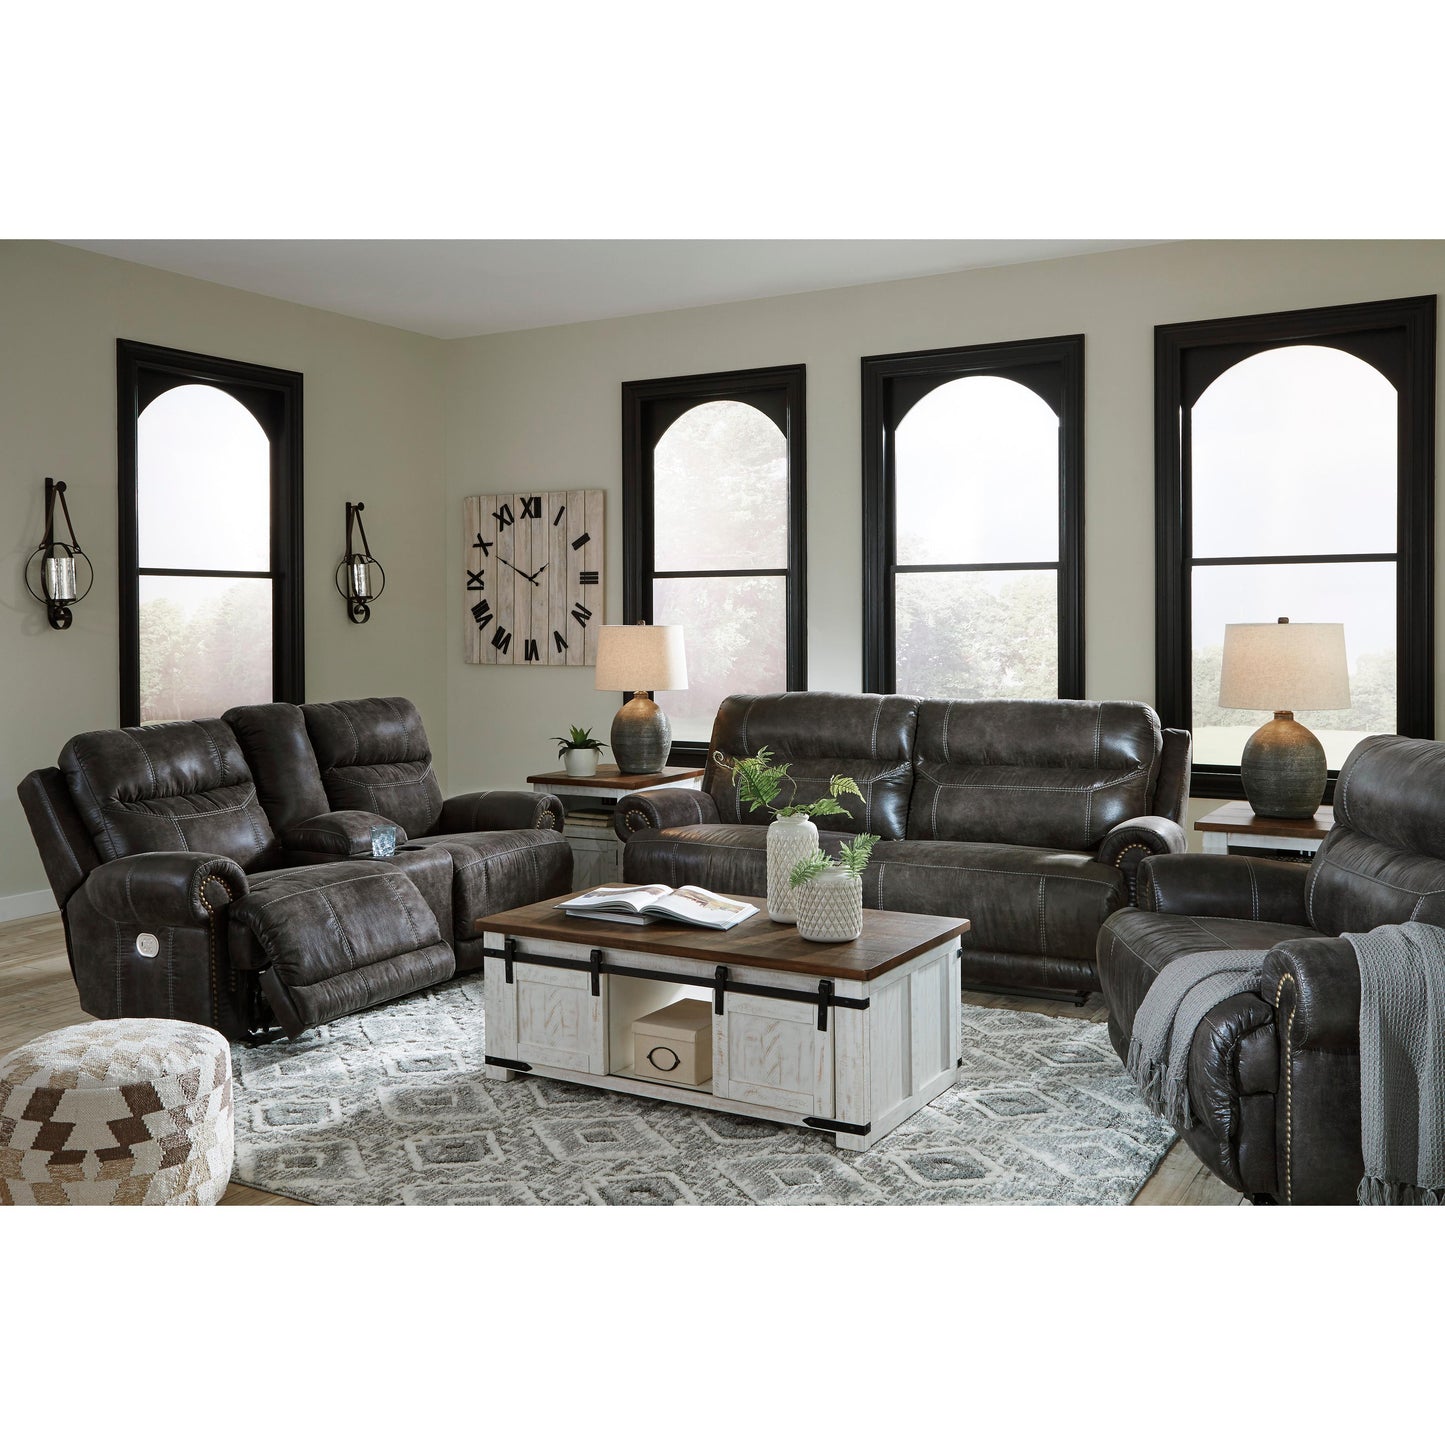 Signature Design by Ashley Grearview Power Reclining Leather Look Sofa 6500547